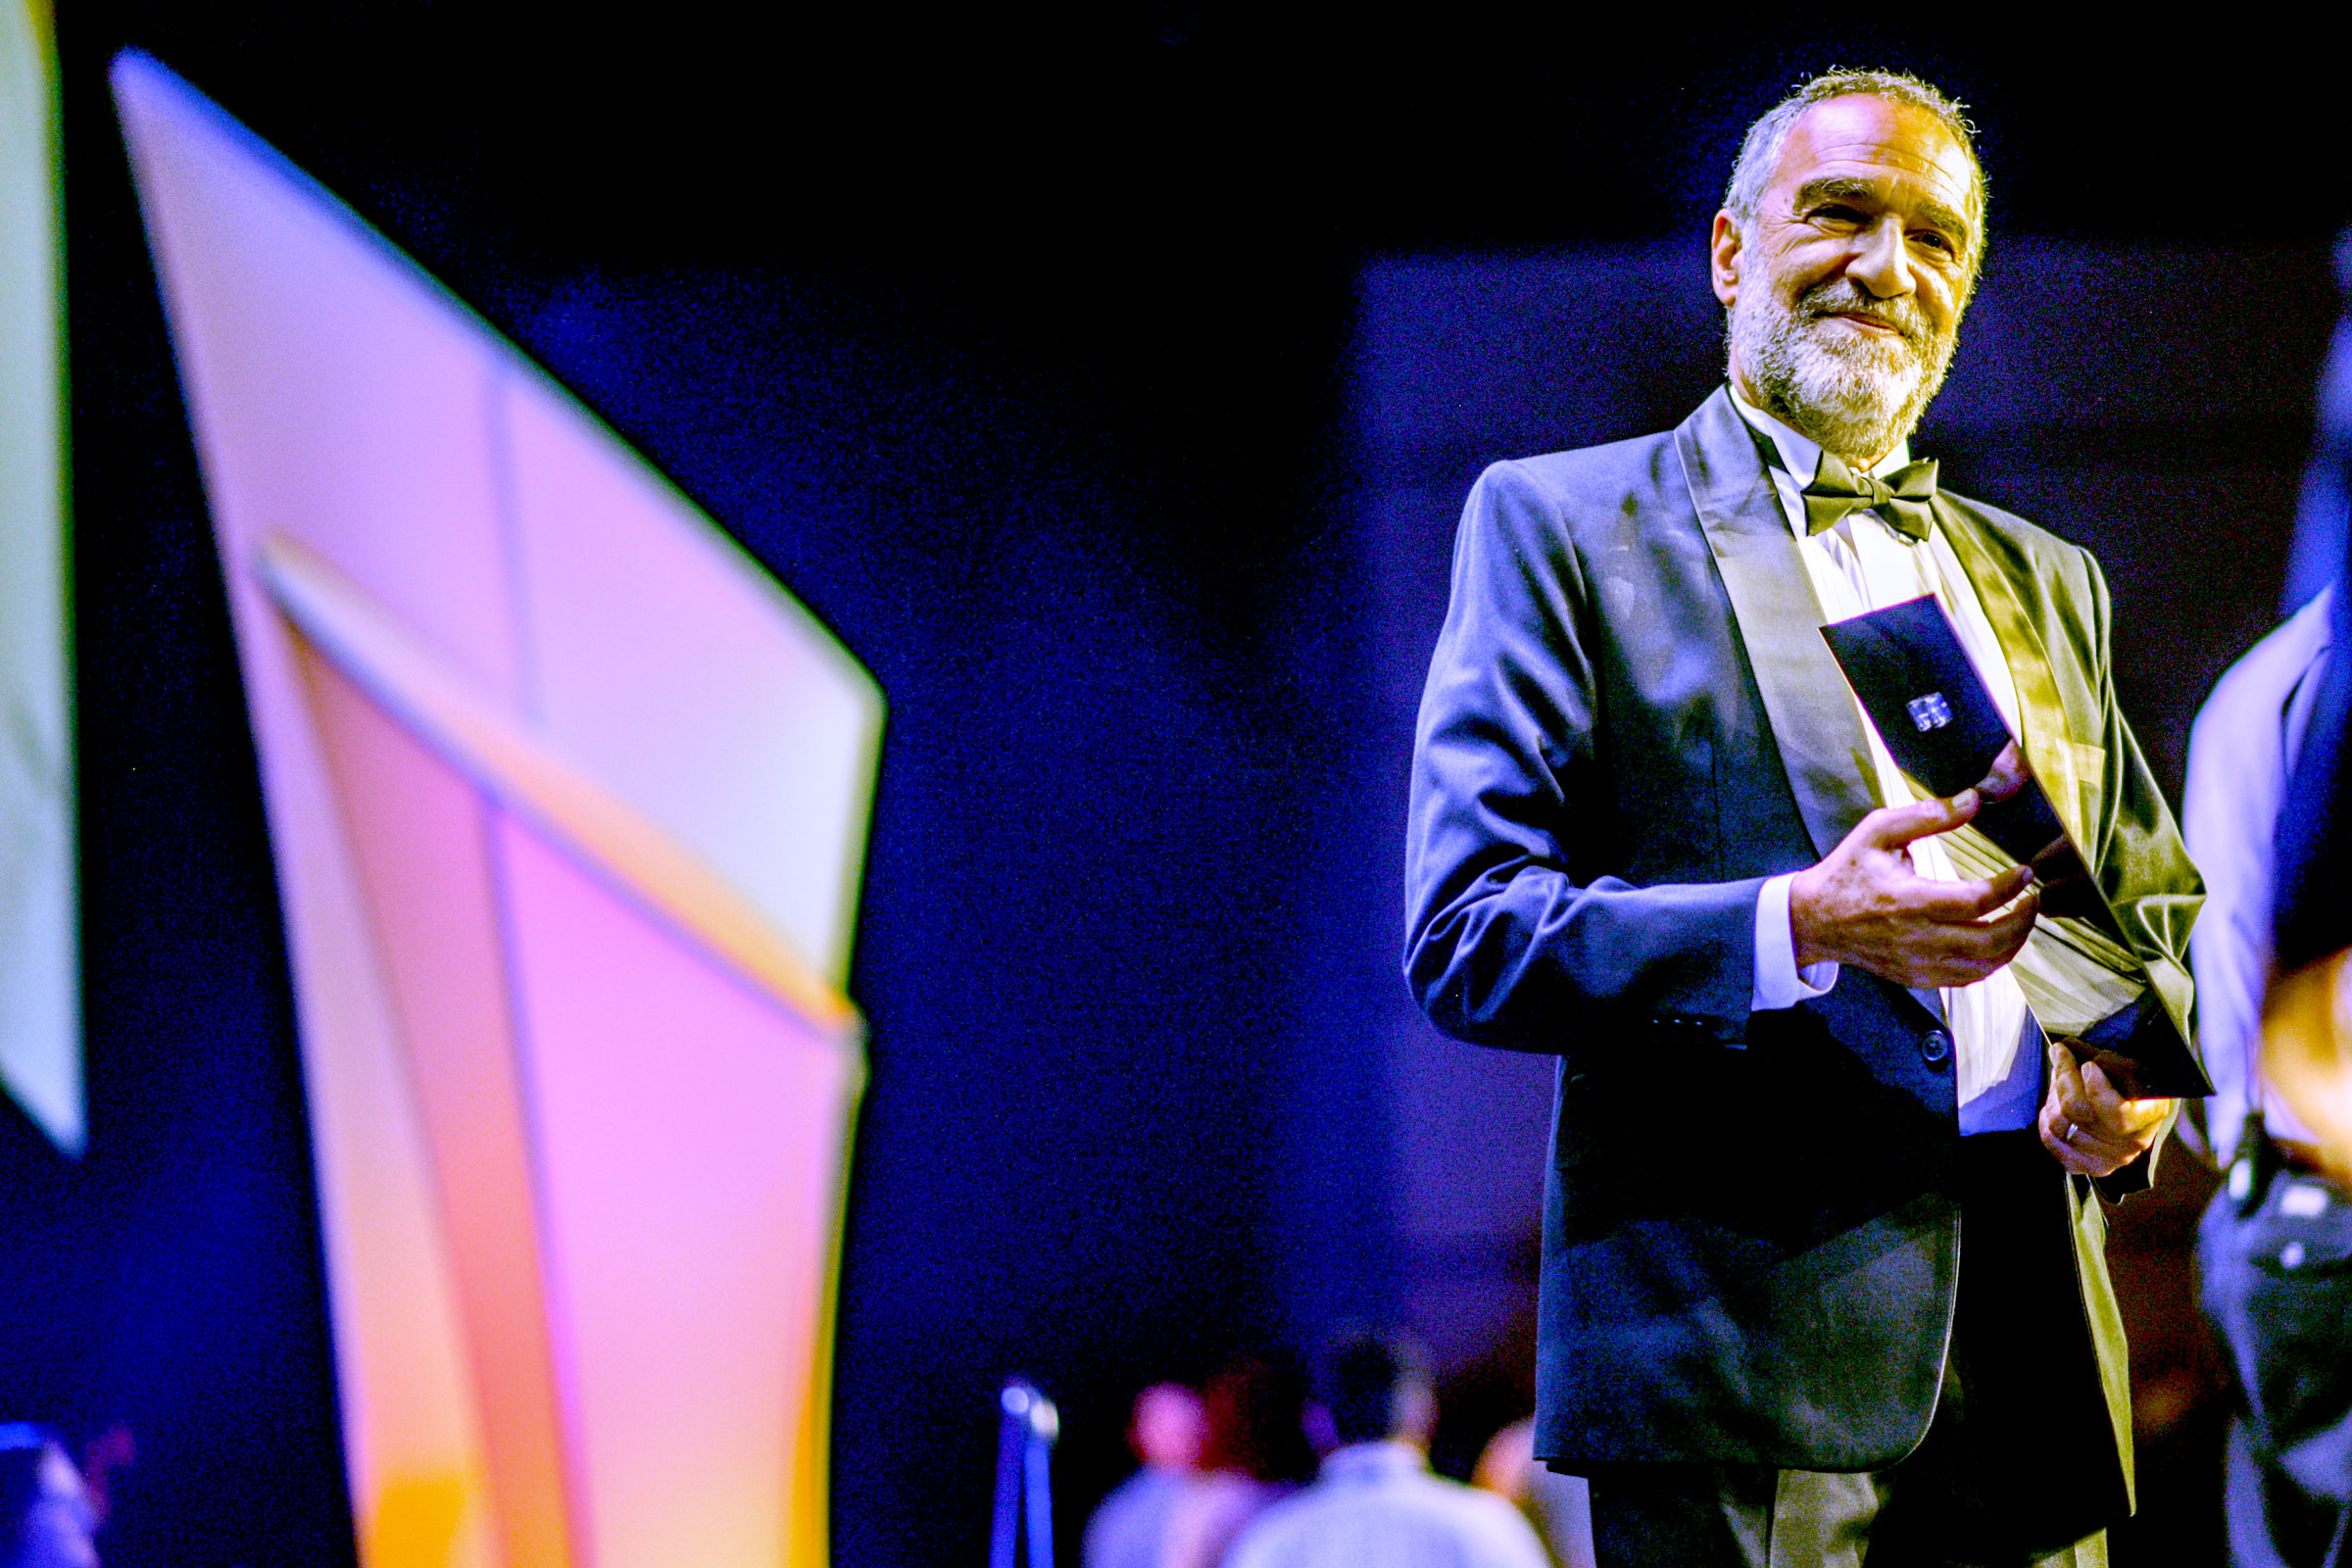 Charlie Papazian at the 2016 World Beer Cup. (Photos © Brewers Association)